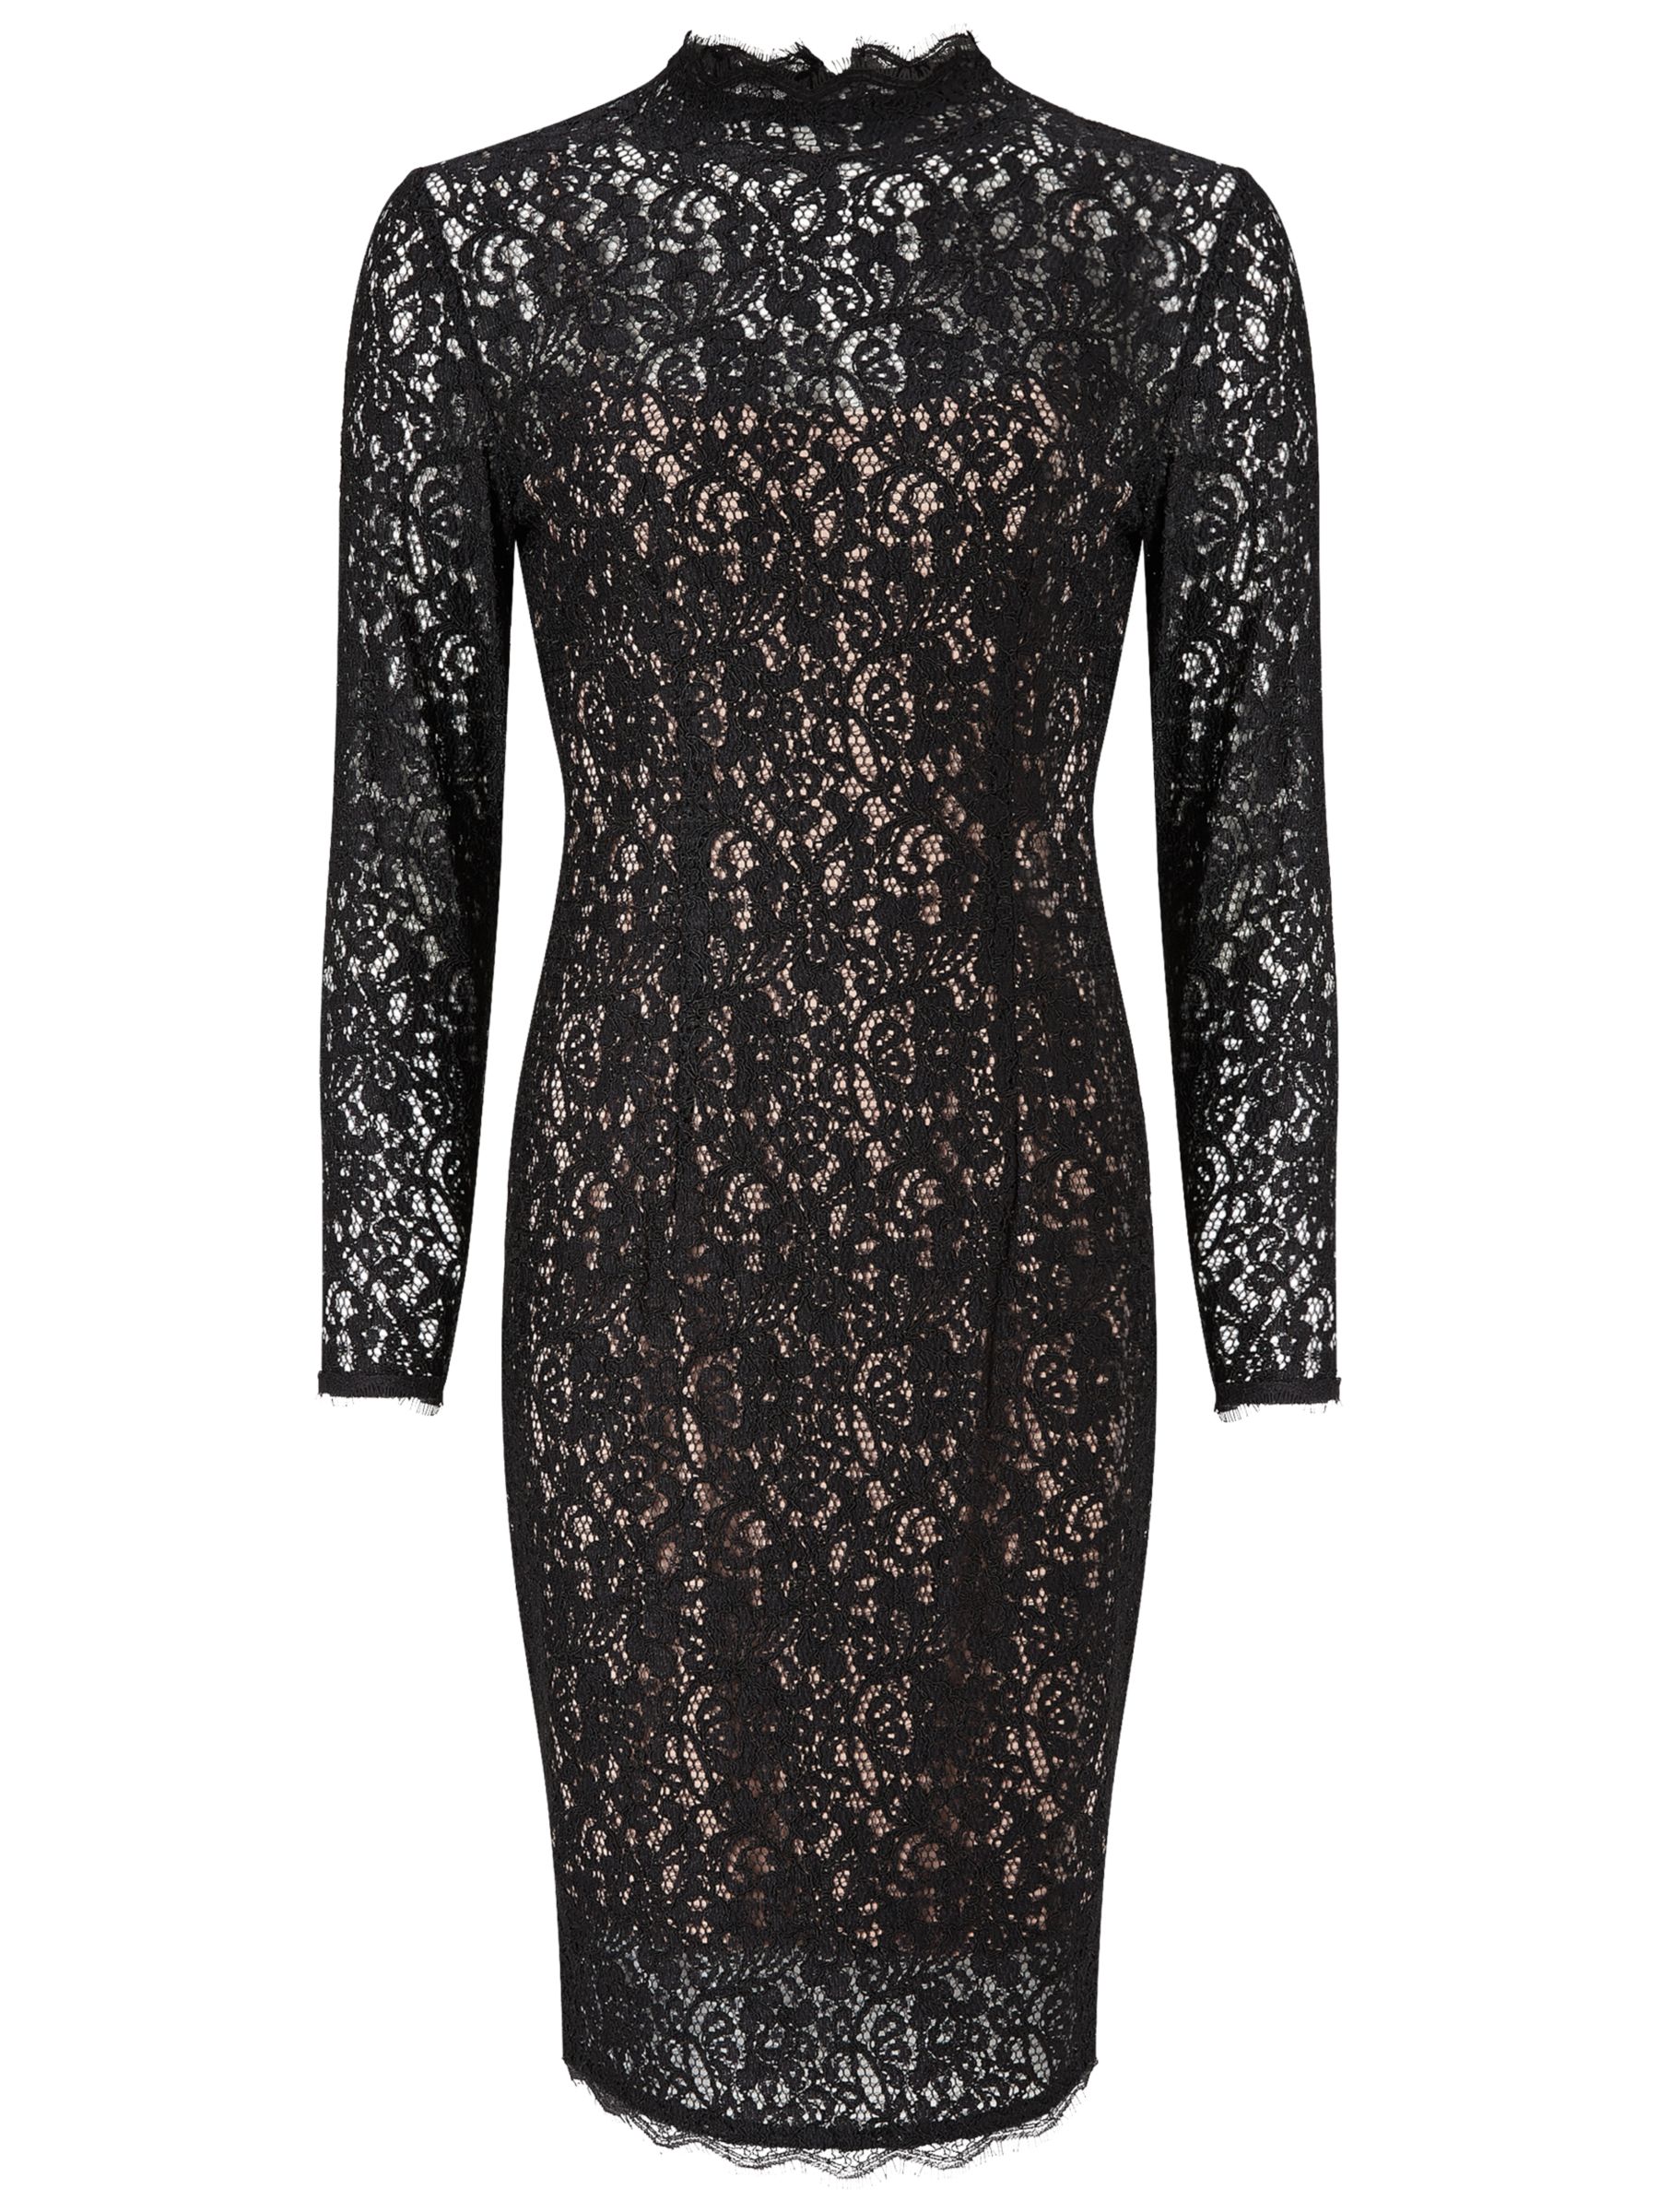 Adrianna Papell High Neck Lace Illusion Dress, Black/Nude